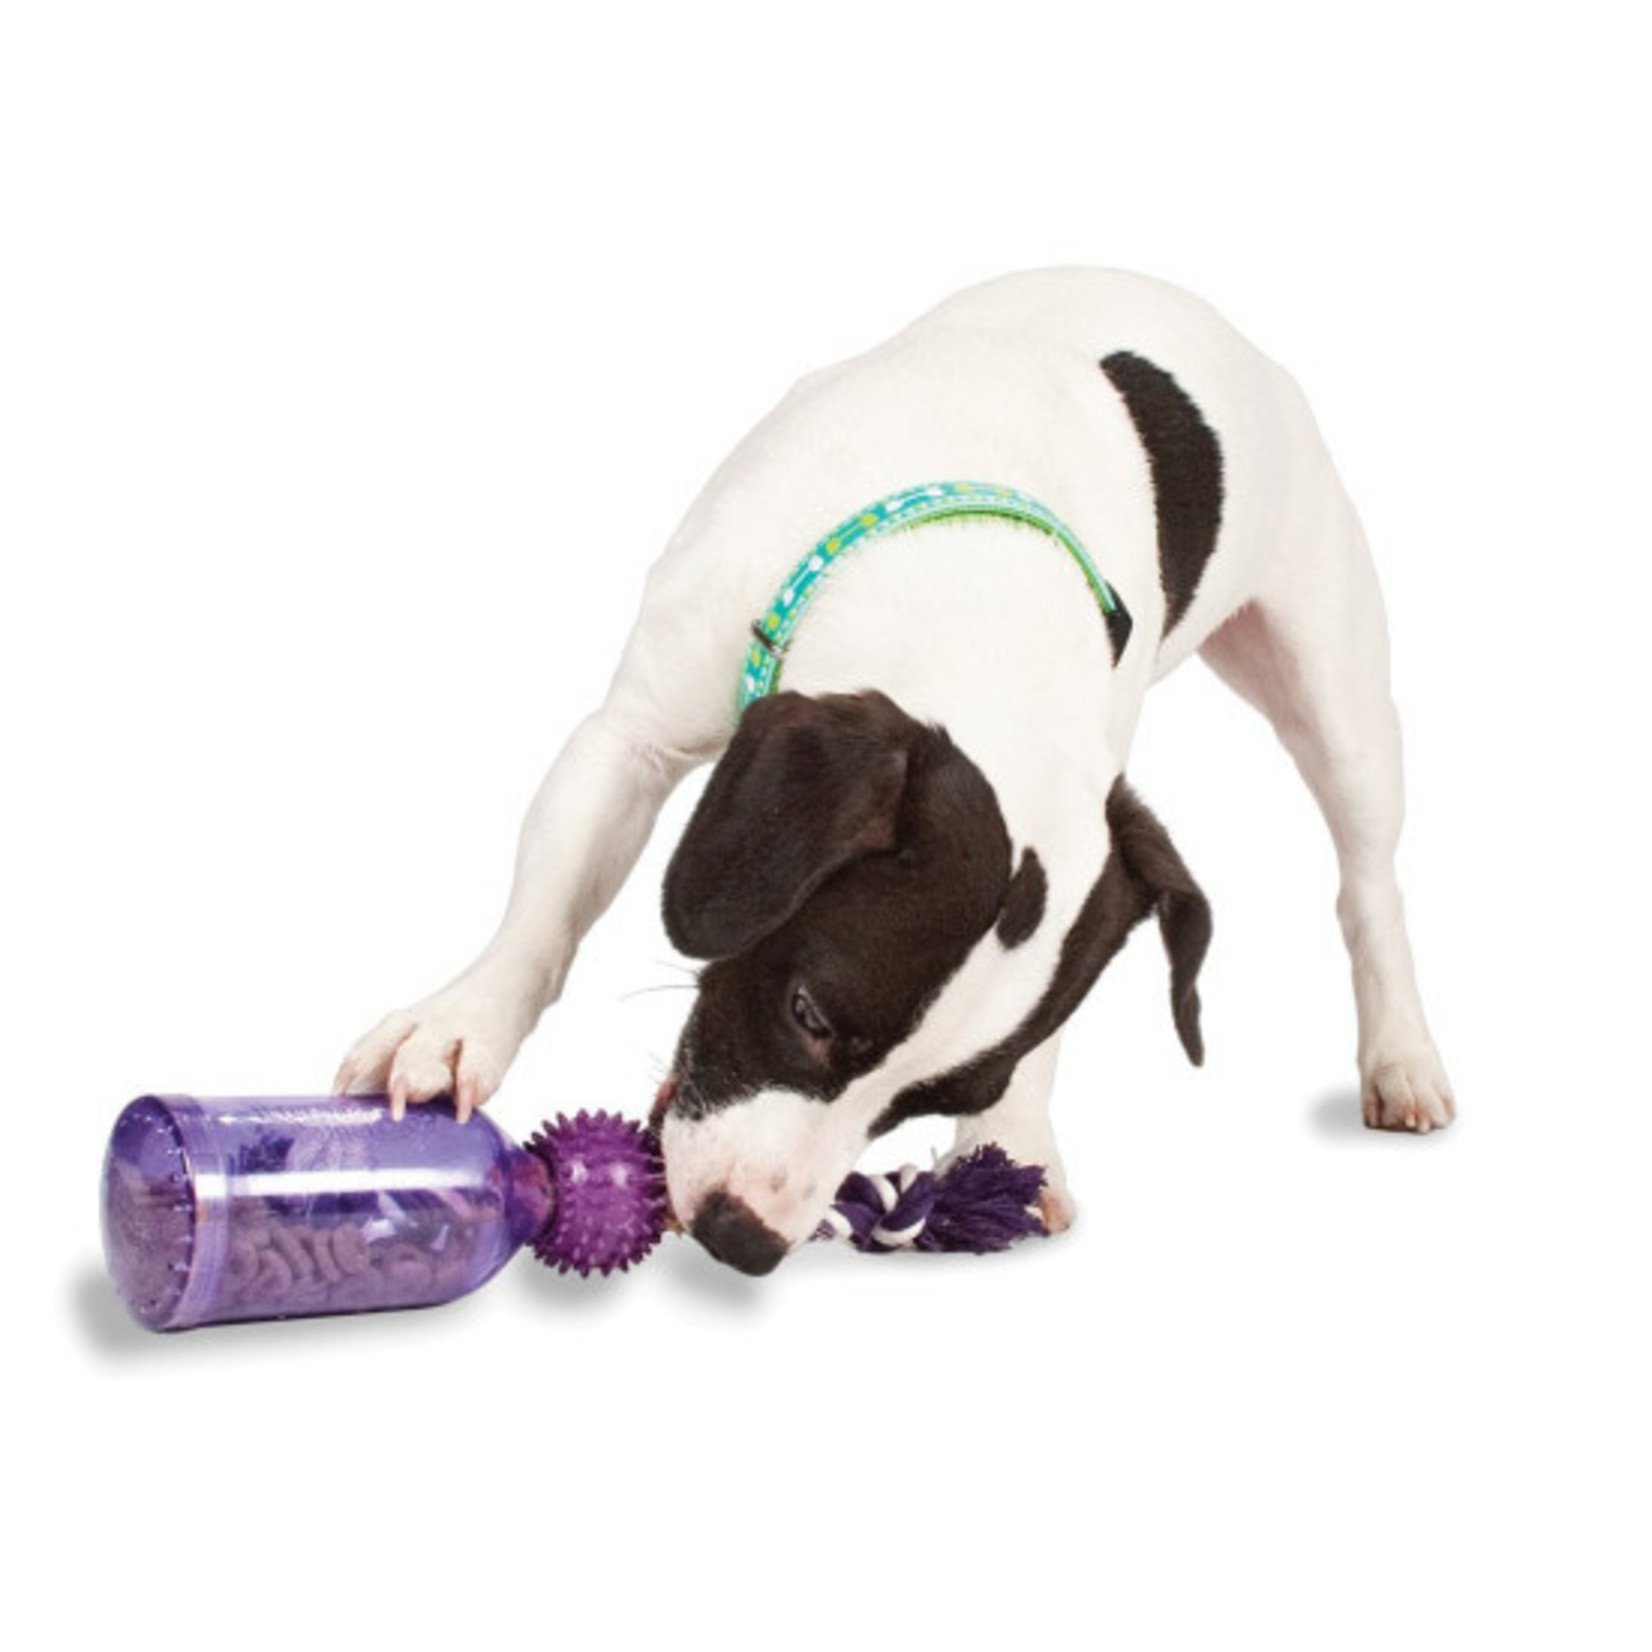 PETSAFE Busy Buddy Calming Treat Dispenser Dog Toy, Small 